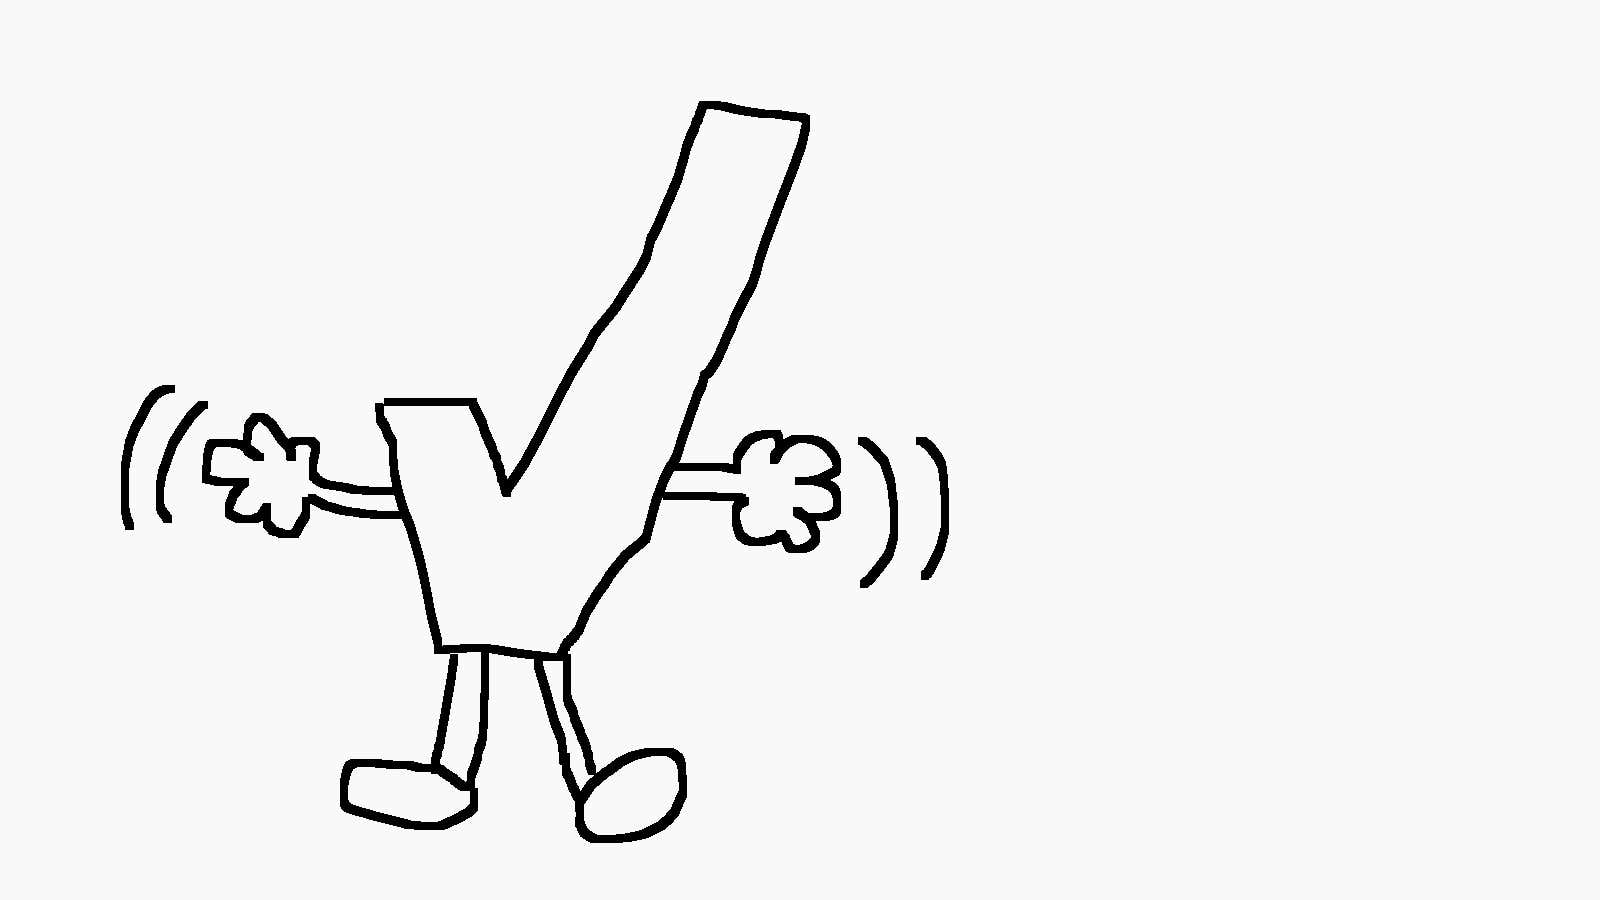 A checkmark with arms and legs